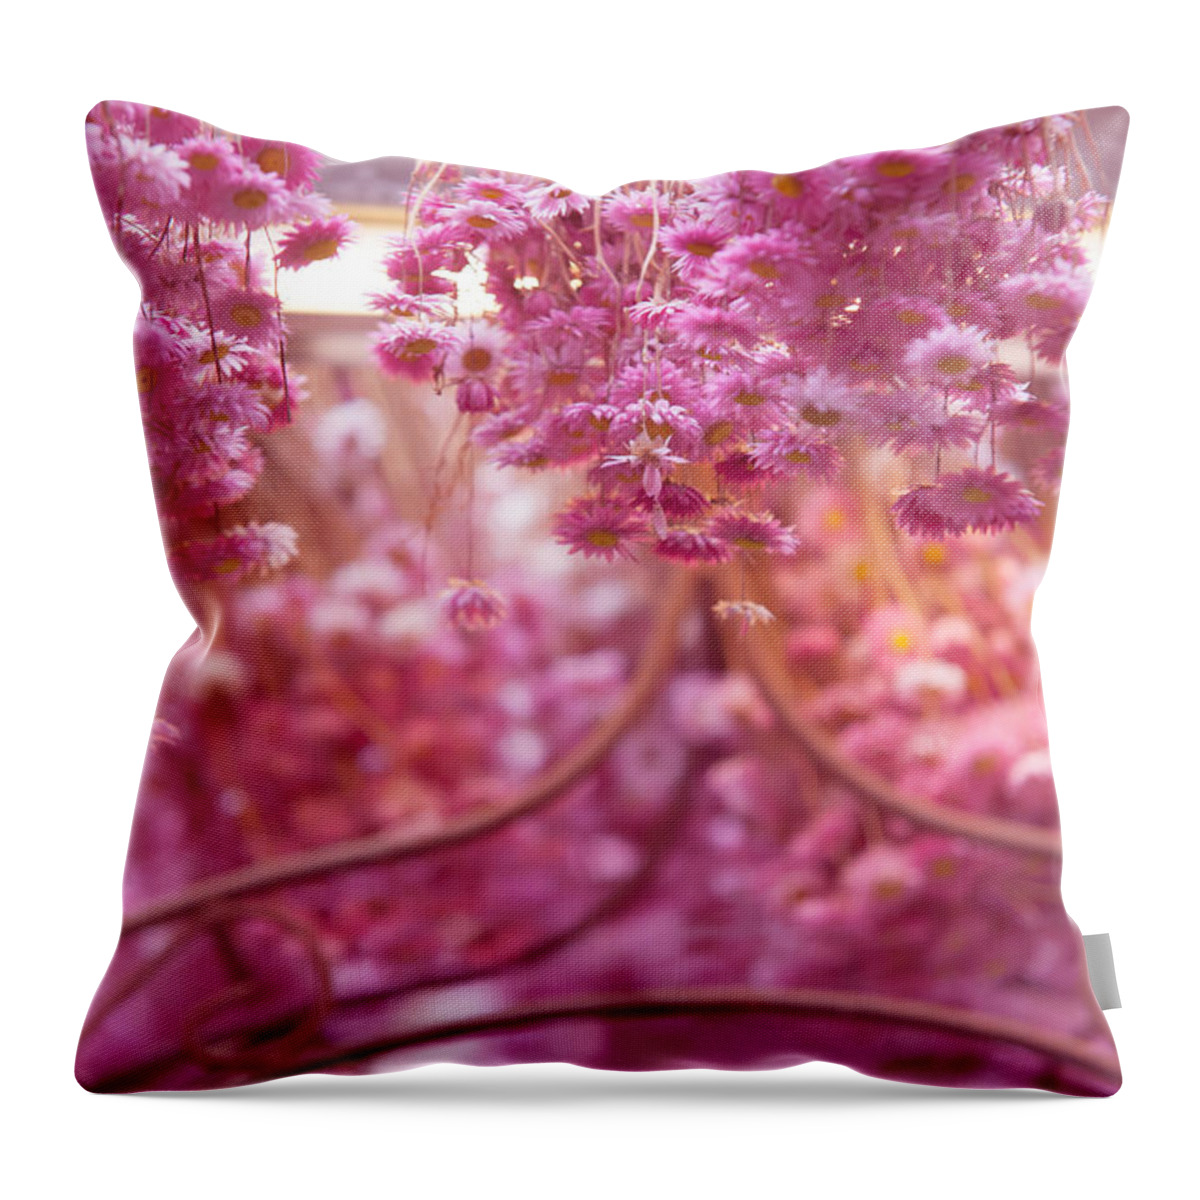 Flower Throw Pillow featuring the photograph Pink Helichrysum. Amsterdam Flower Market by Jenny Rainbow